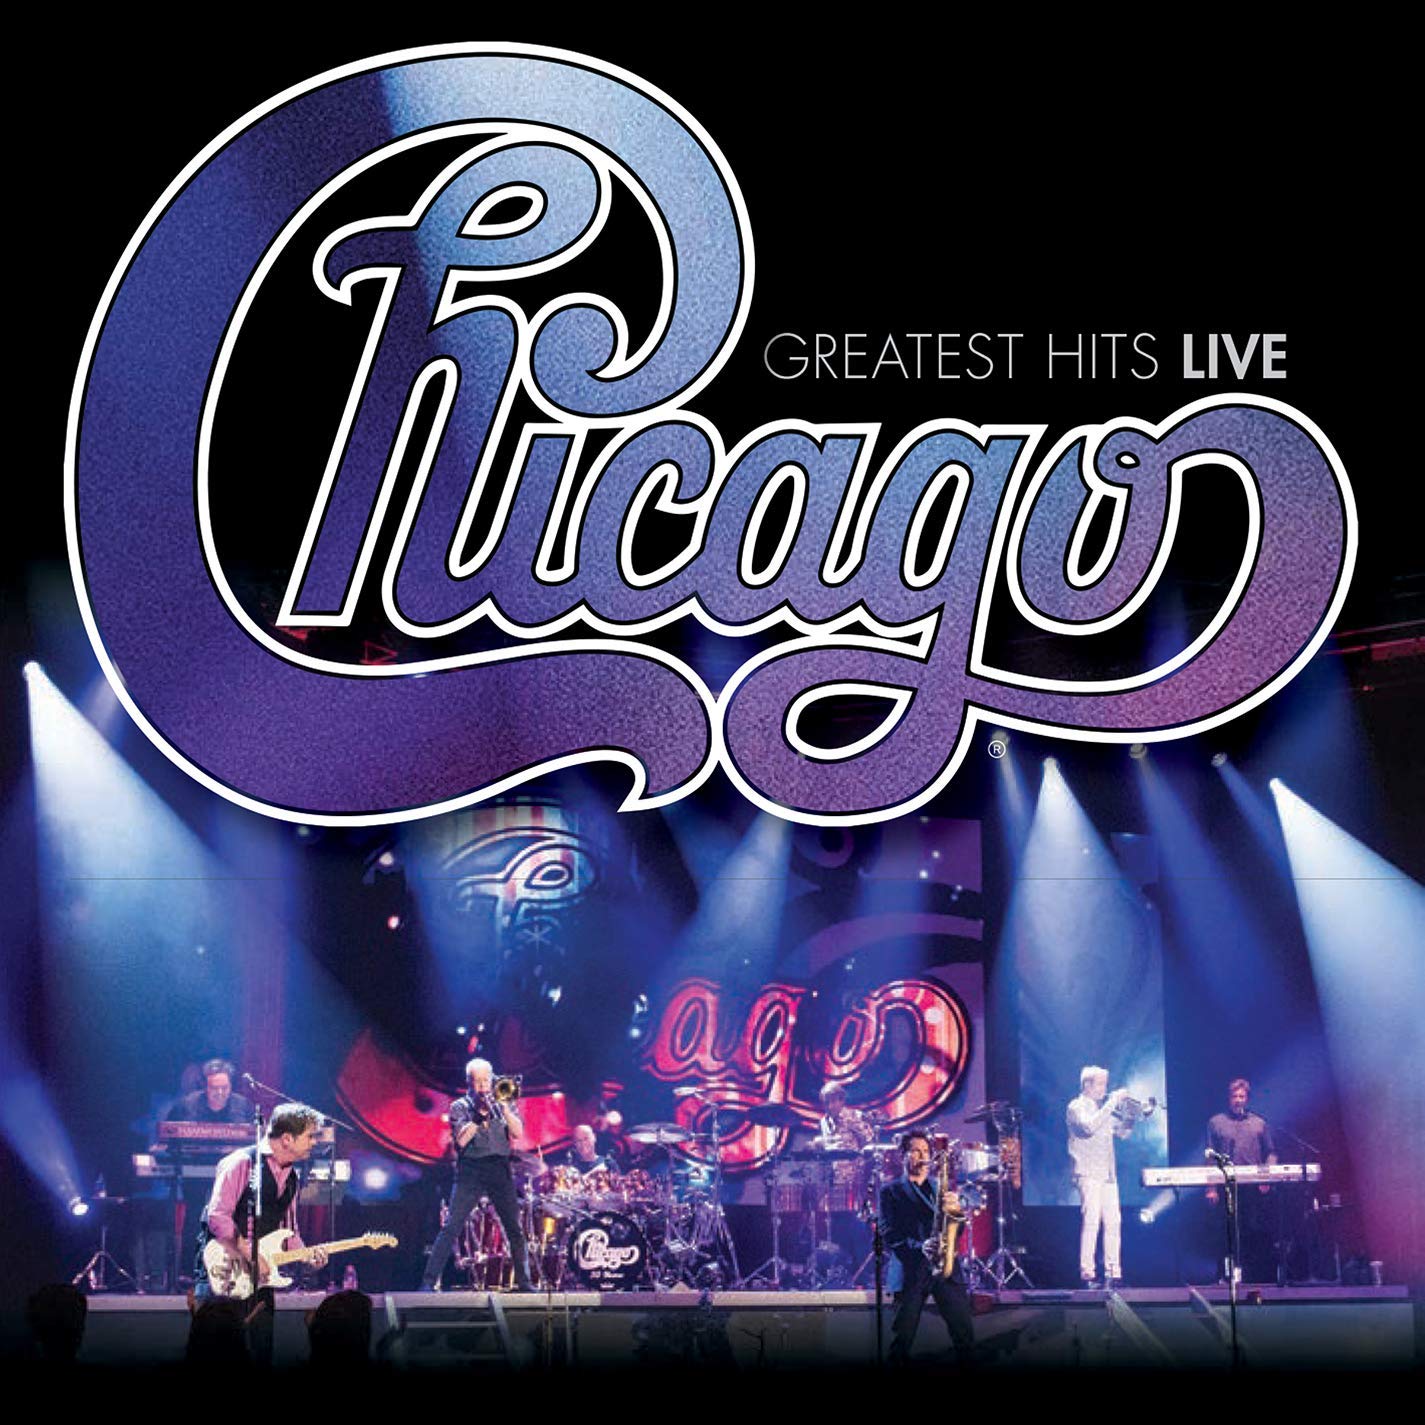 CHICAGO / シカゴ / GREATEST HITS LIVE [CD+DVD]